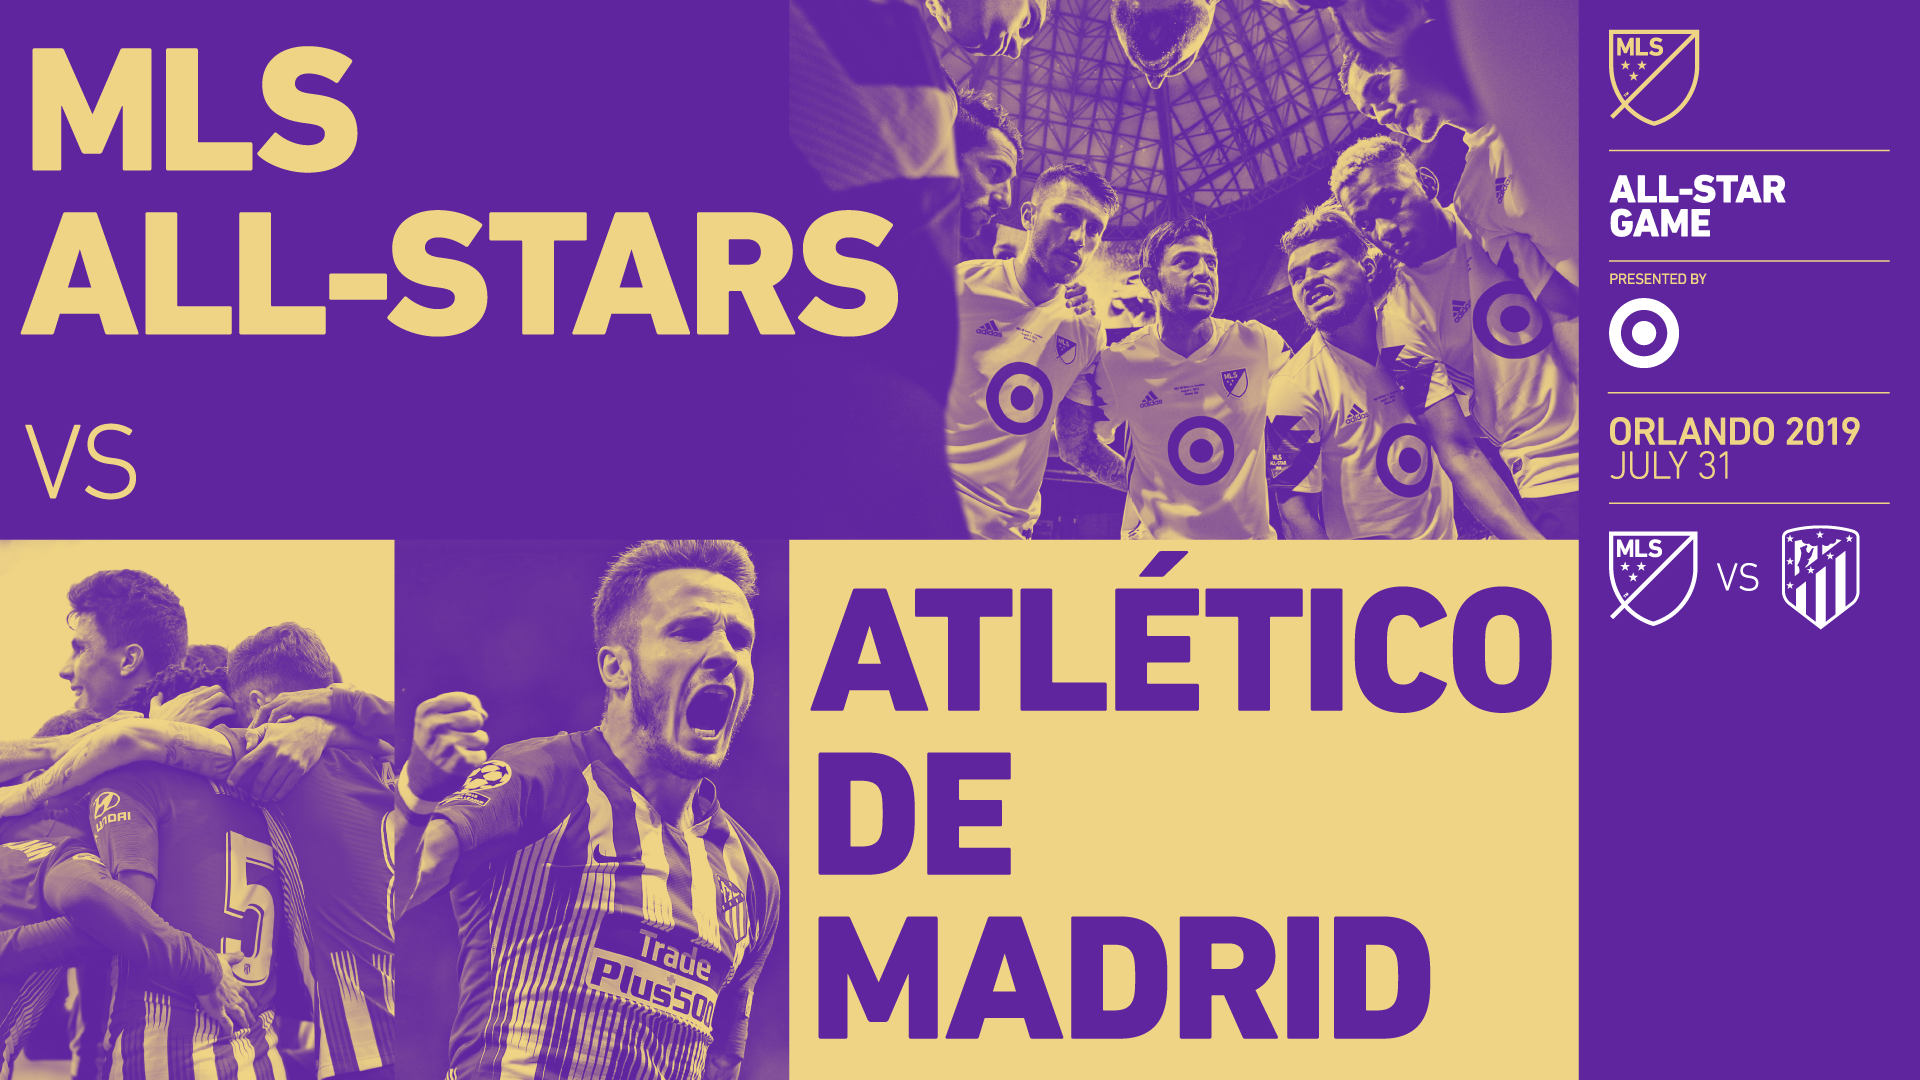 All Star Game Generic Promotion - Atletico Mls All Stars - HD Wallpaper 